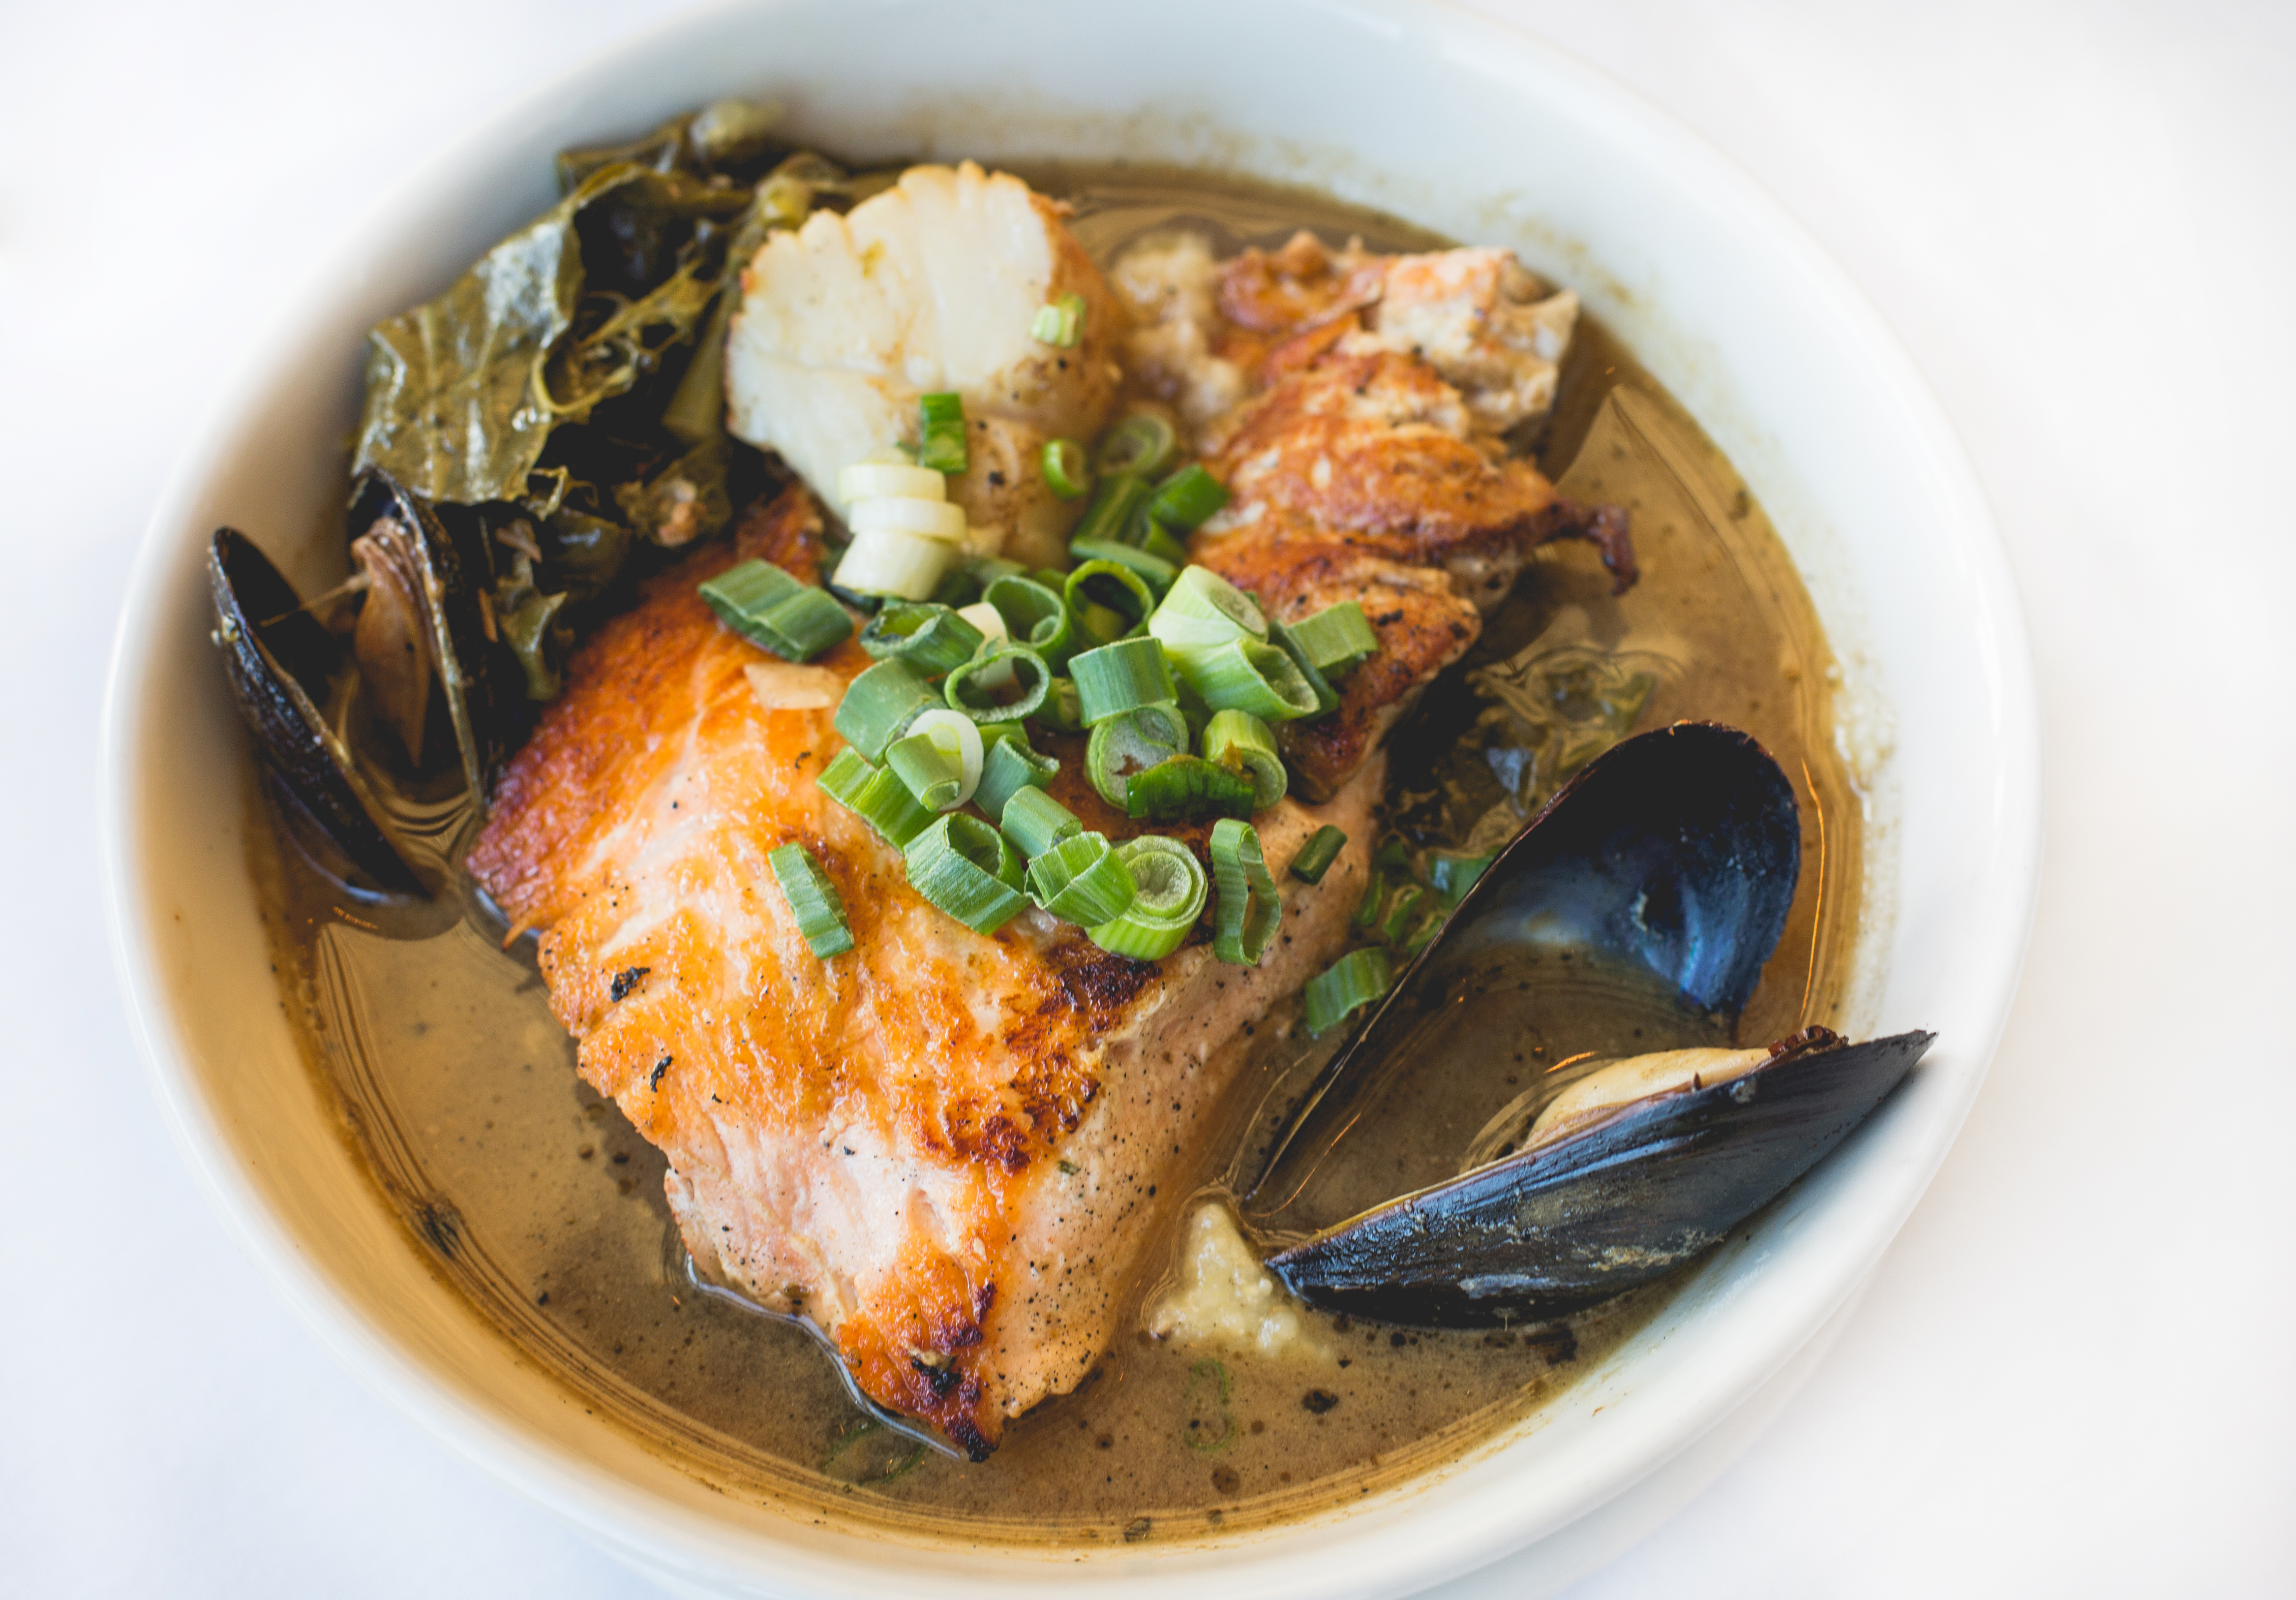 A bowl of Creole Potlikker Fish Stew with fish, mussels, scallops, greens, and grits.